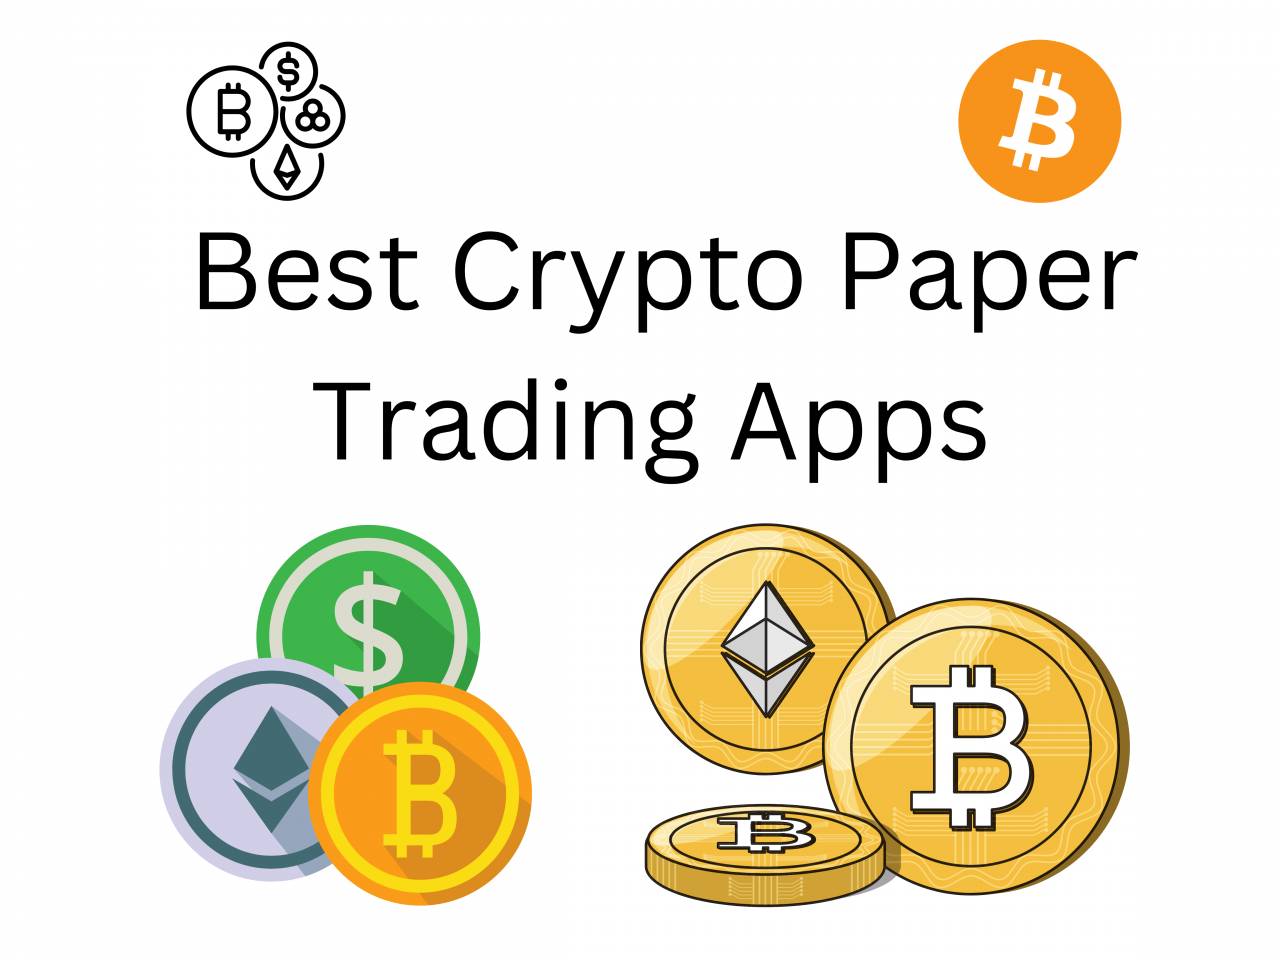 crypto paper trading apps for learners